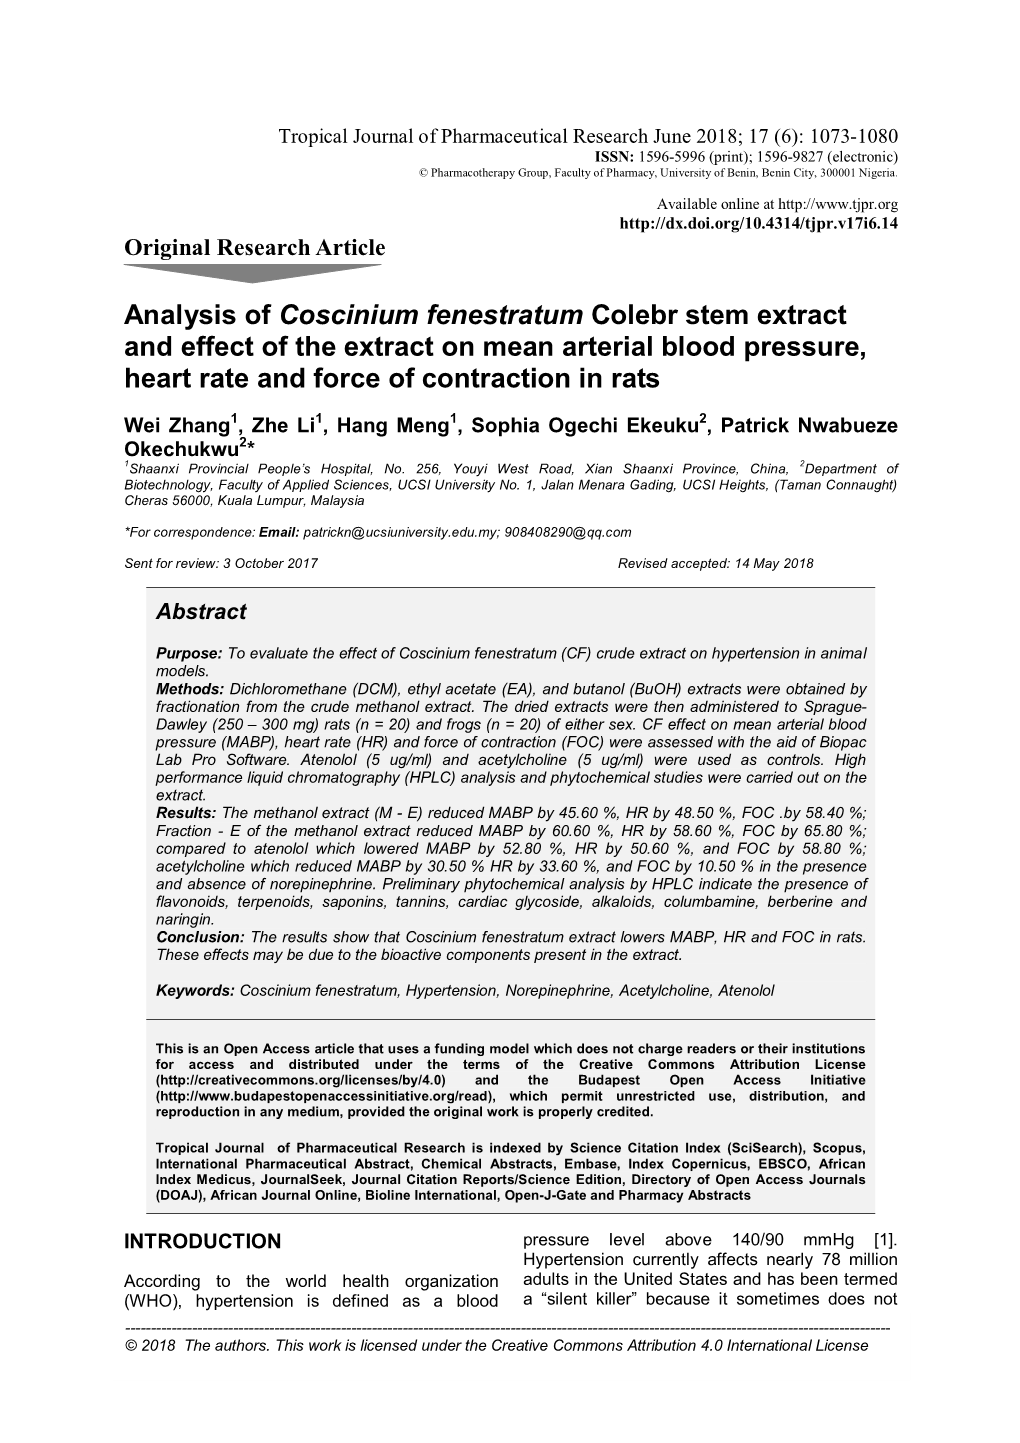 Analysis of Coscinium Fenestratum Colebr Stem Extract and Effect of the Extract on Mean Arterial Blood Pressure, Heart Rate and Force of Contraction in Rats